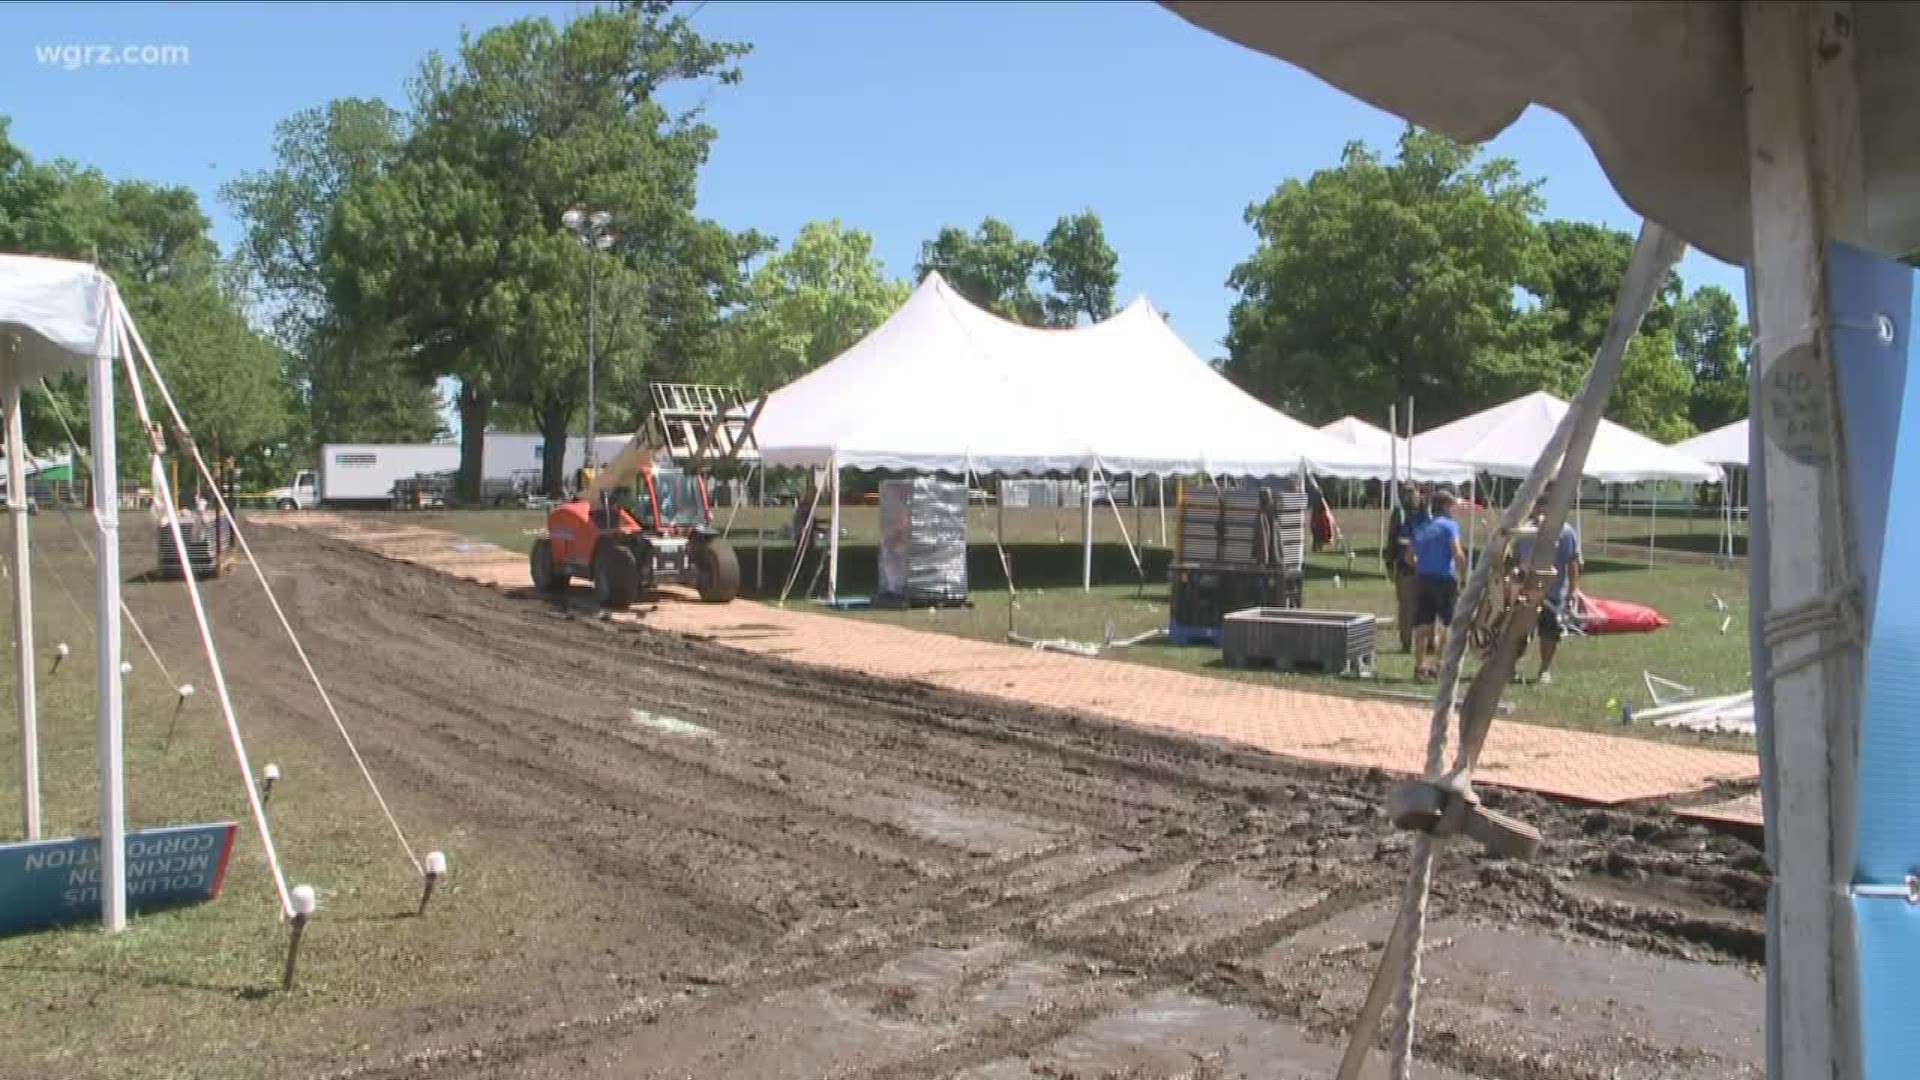 The Olmsted Park Conservancy says it could take more than a month, and tens of thousands of dollars to repair all the damage from last night's J-P Morgan Corporate Challenge.